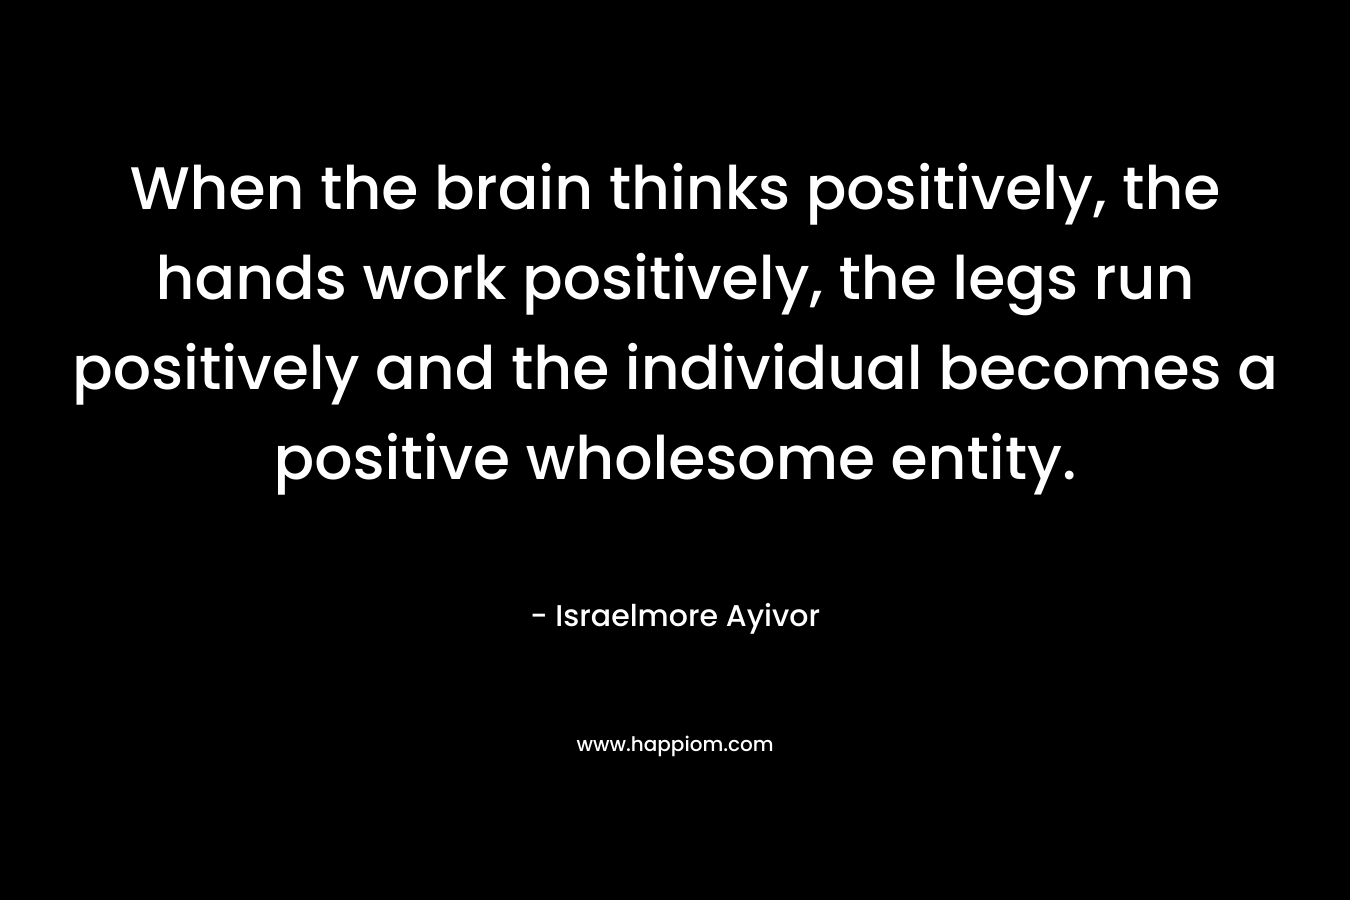 When the brain thinks positively, the hands work positively, the legs run positively and the individual becomes a positive wholesome entity.